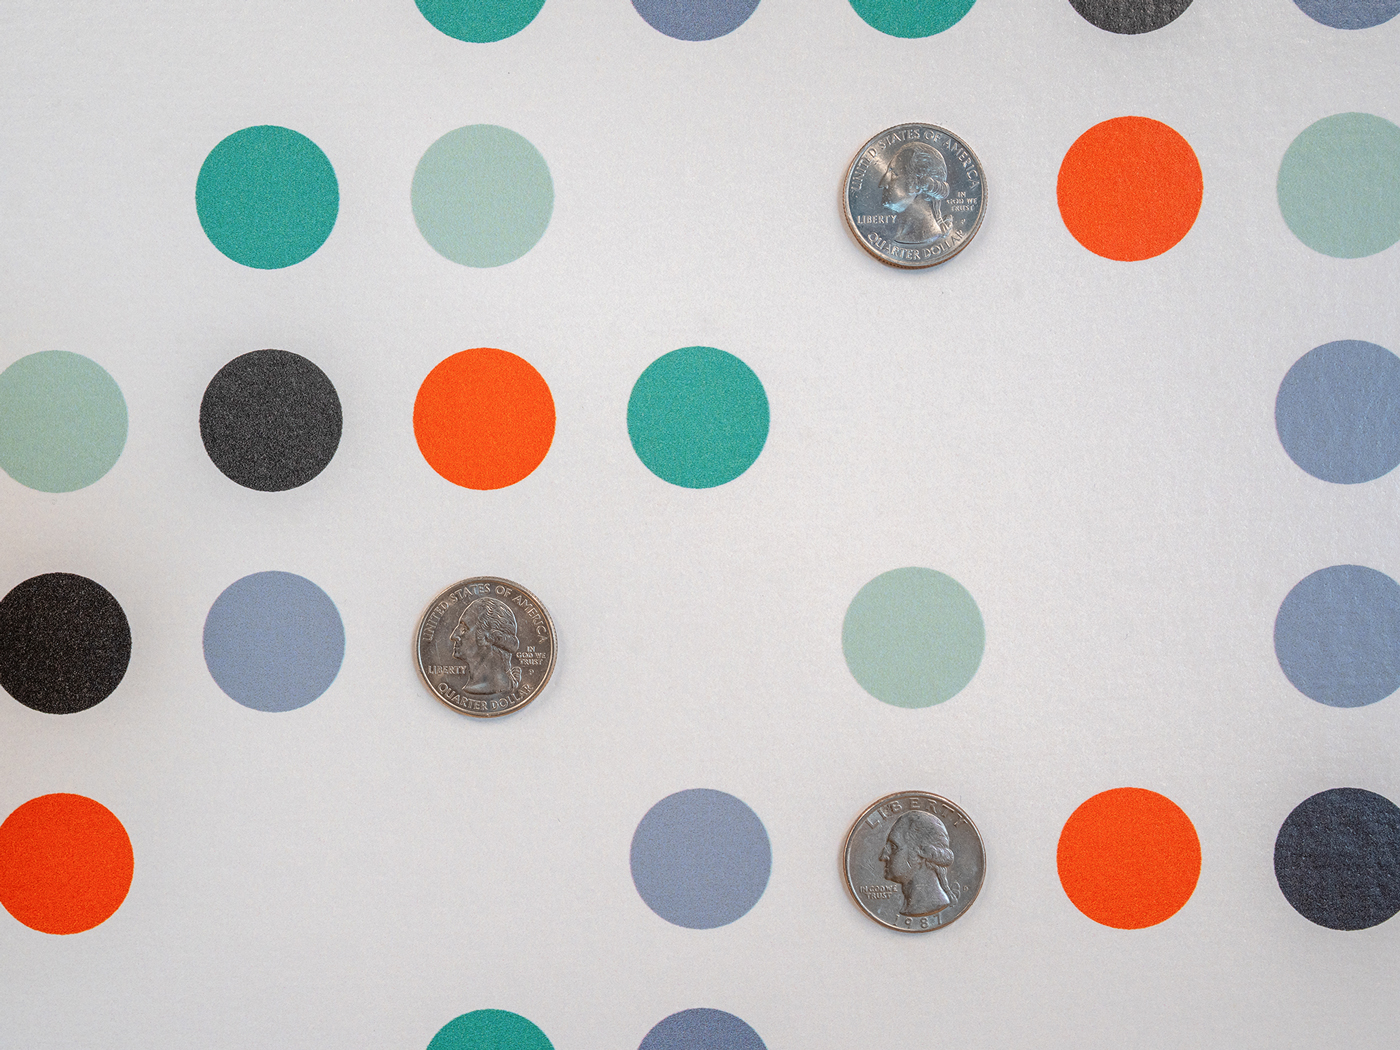 Detail photo of wall graphic with colorful circles and dimes